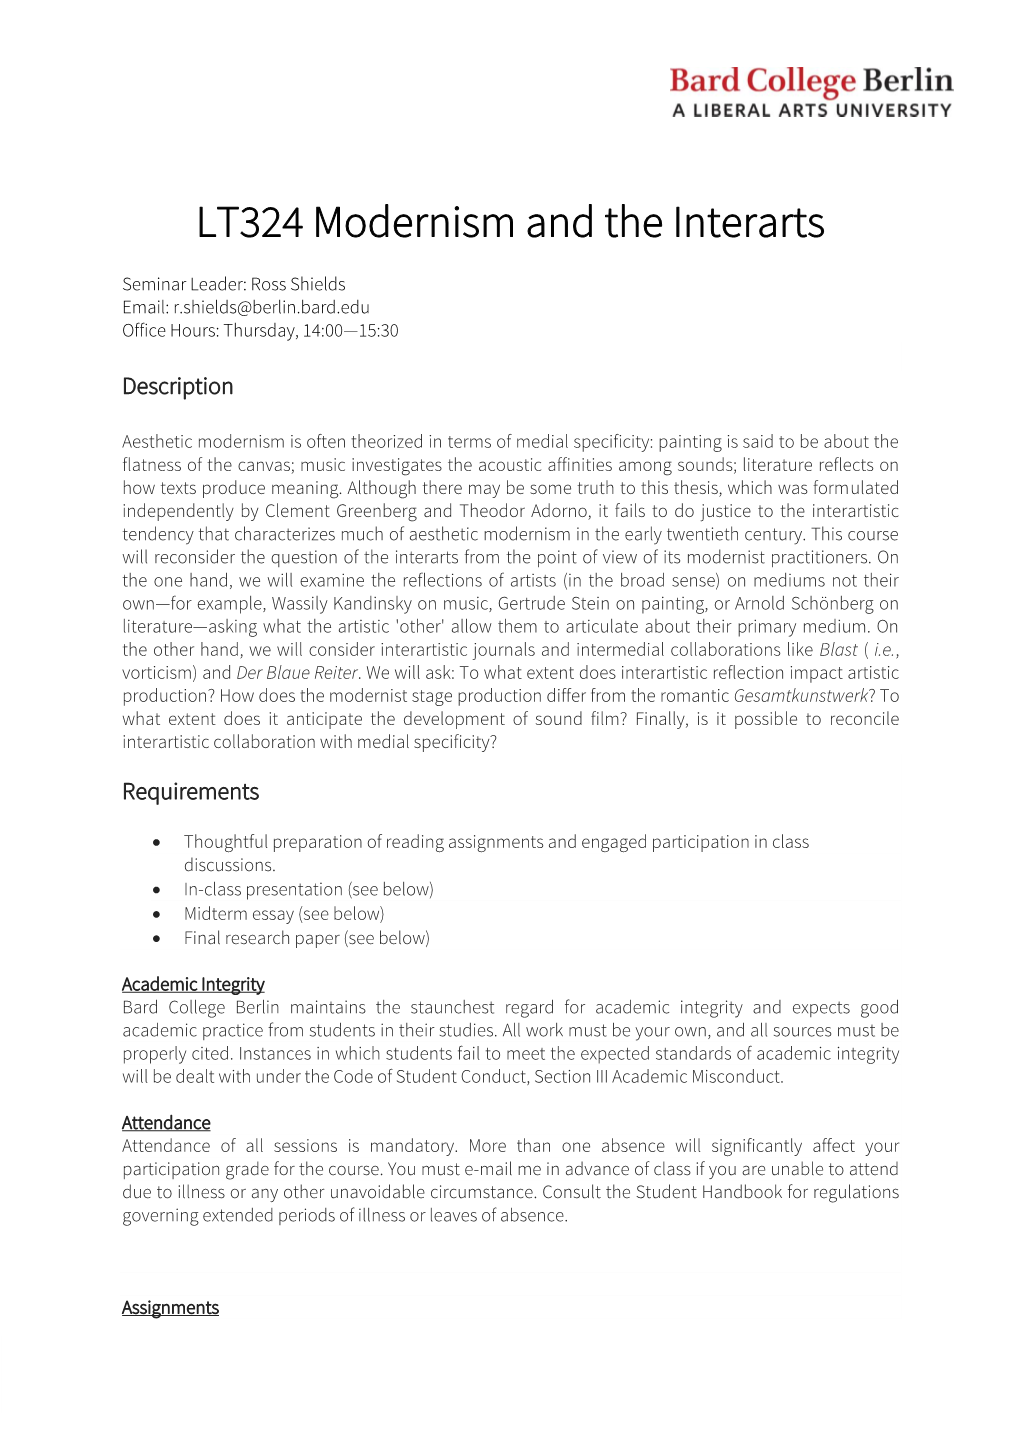 LT324 Modernism and the Interarts